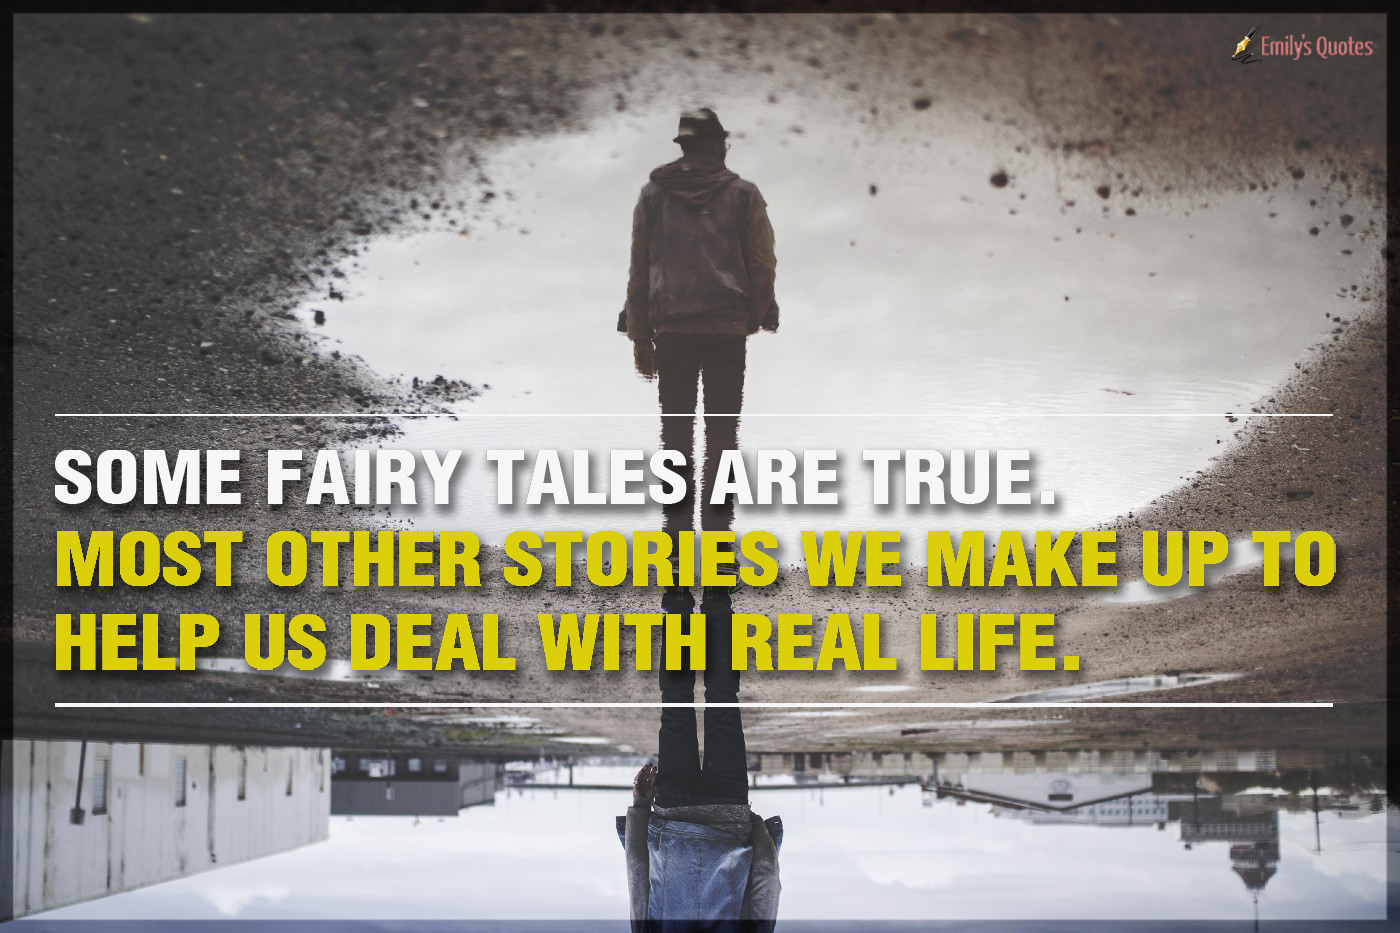 Some fairy tales are true. Most other stories we make up to